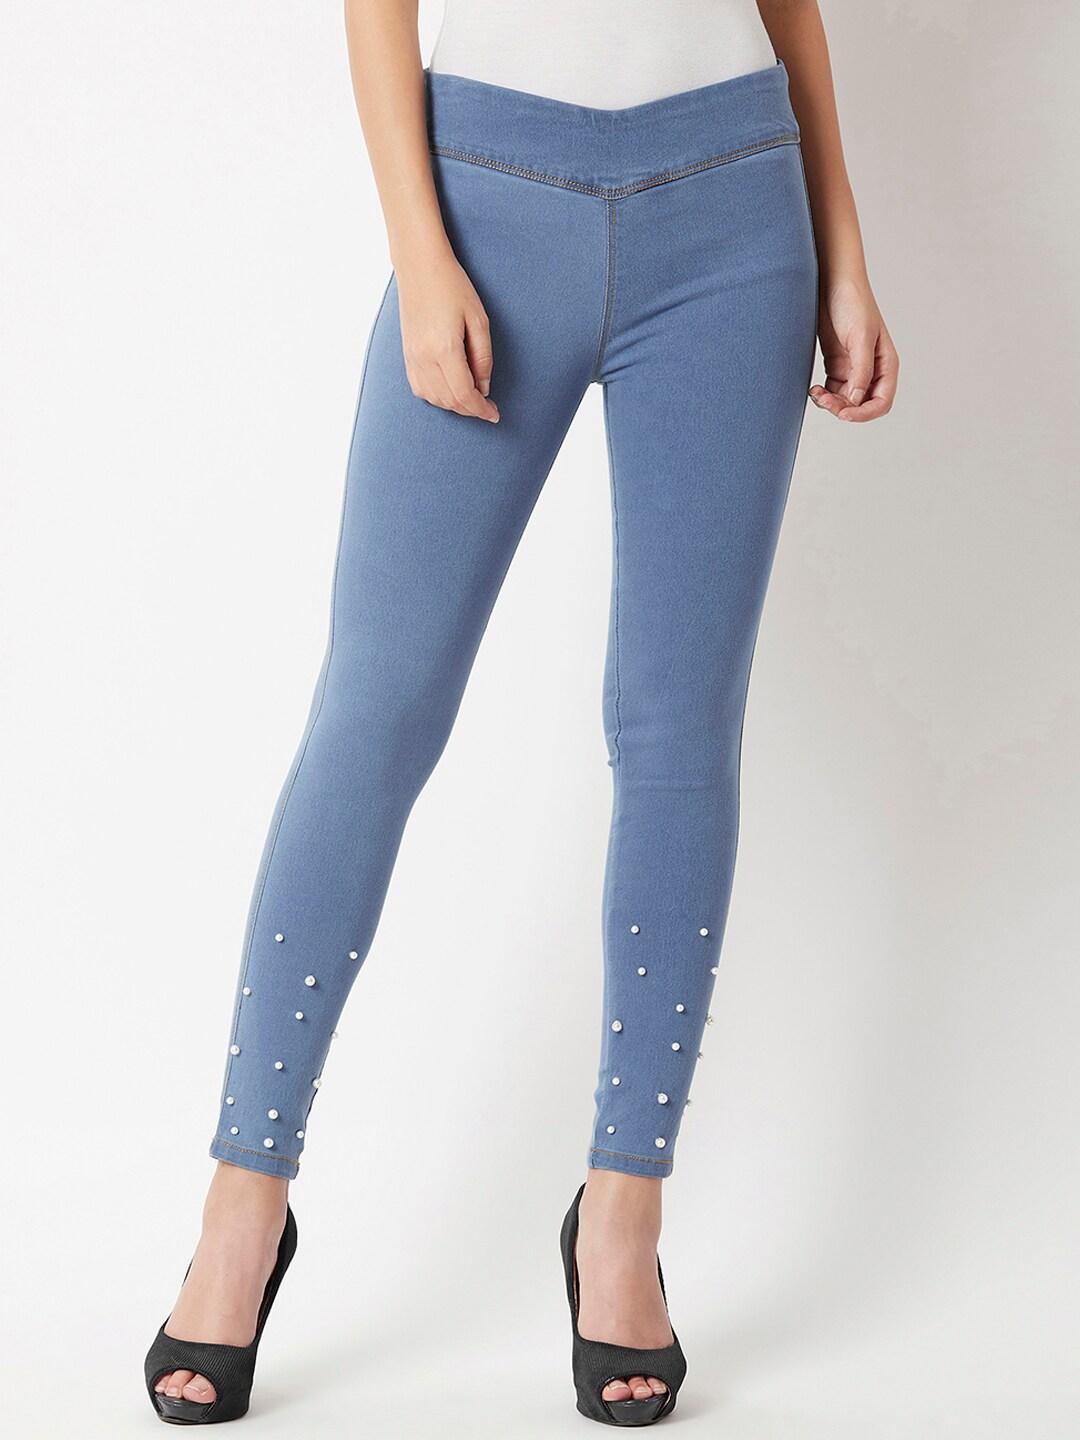 miss-chase-women-blue-high-rise-embellished-detail-skinny-fit-jeggings